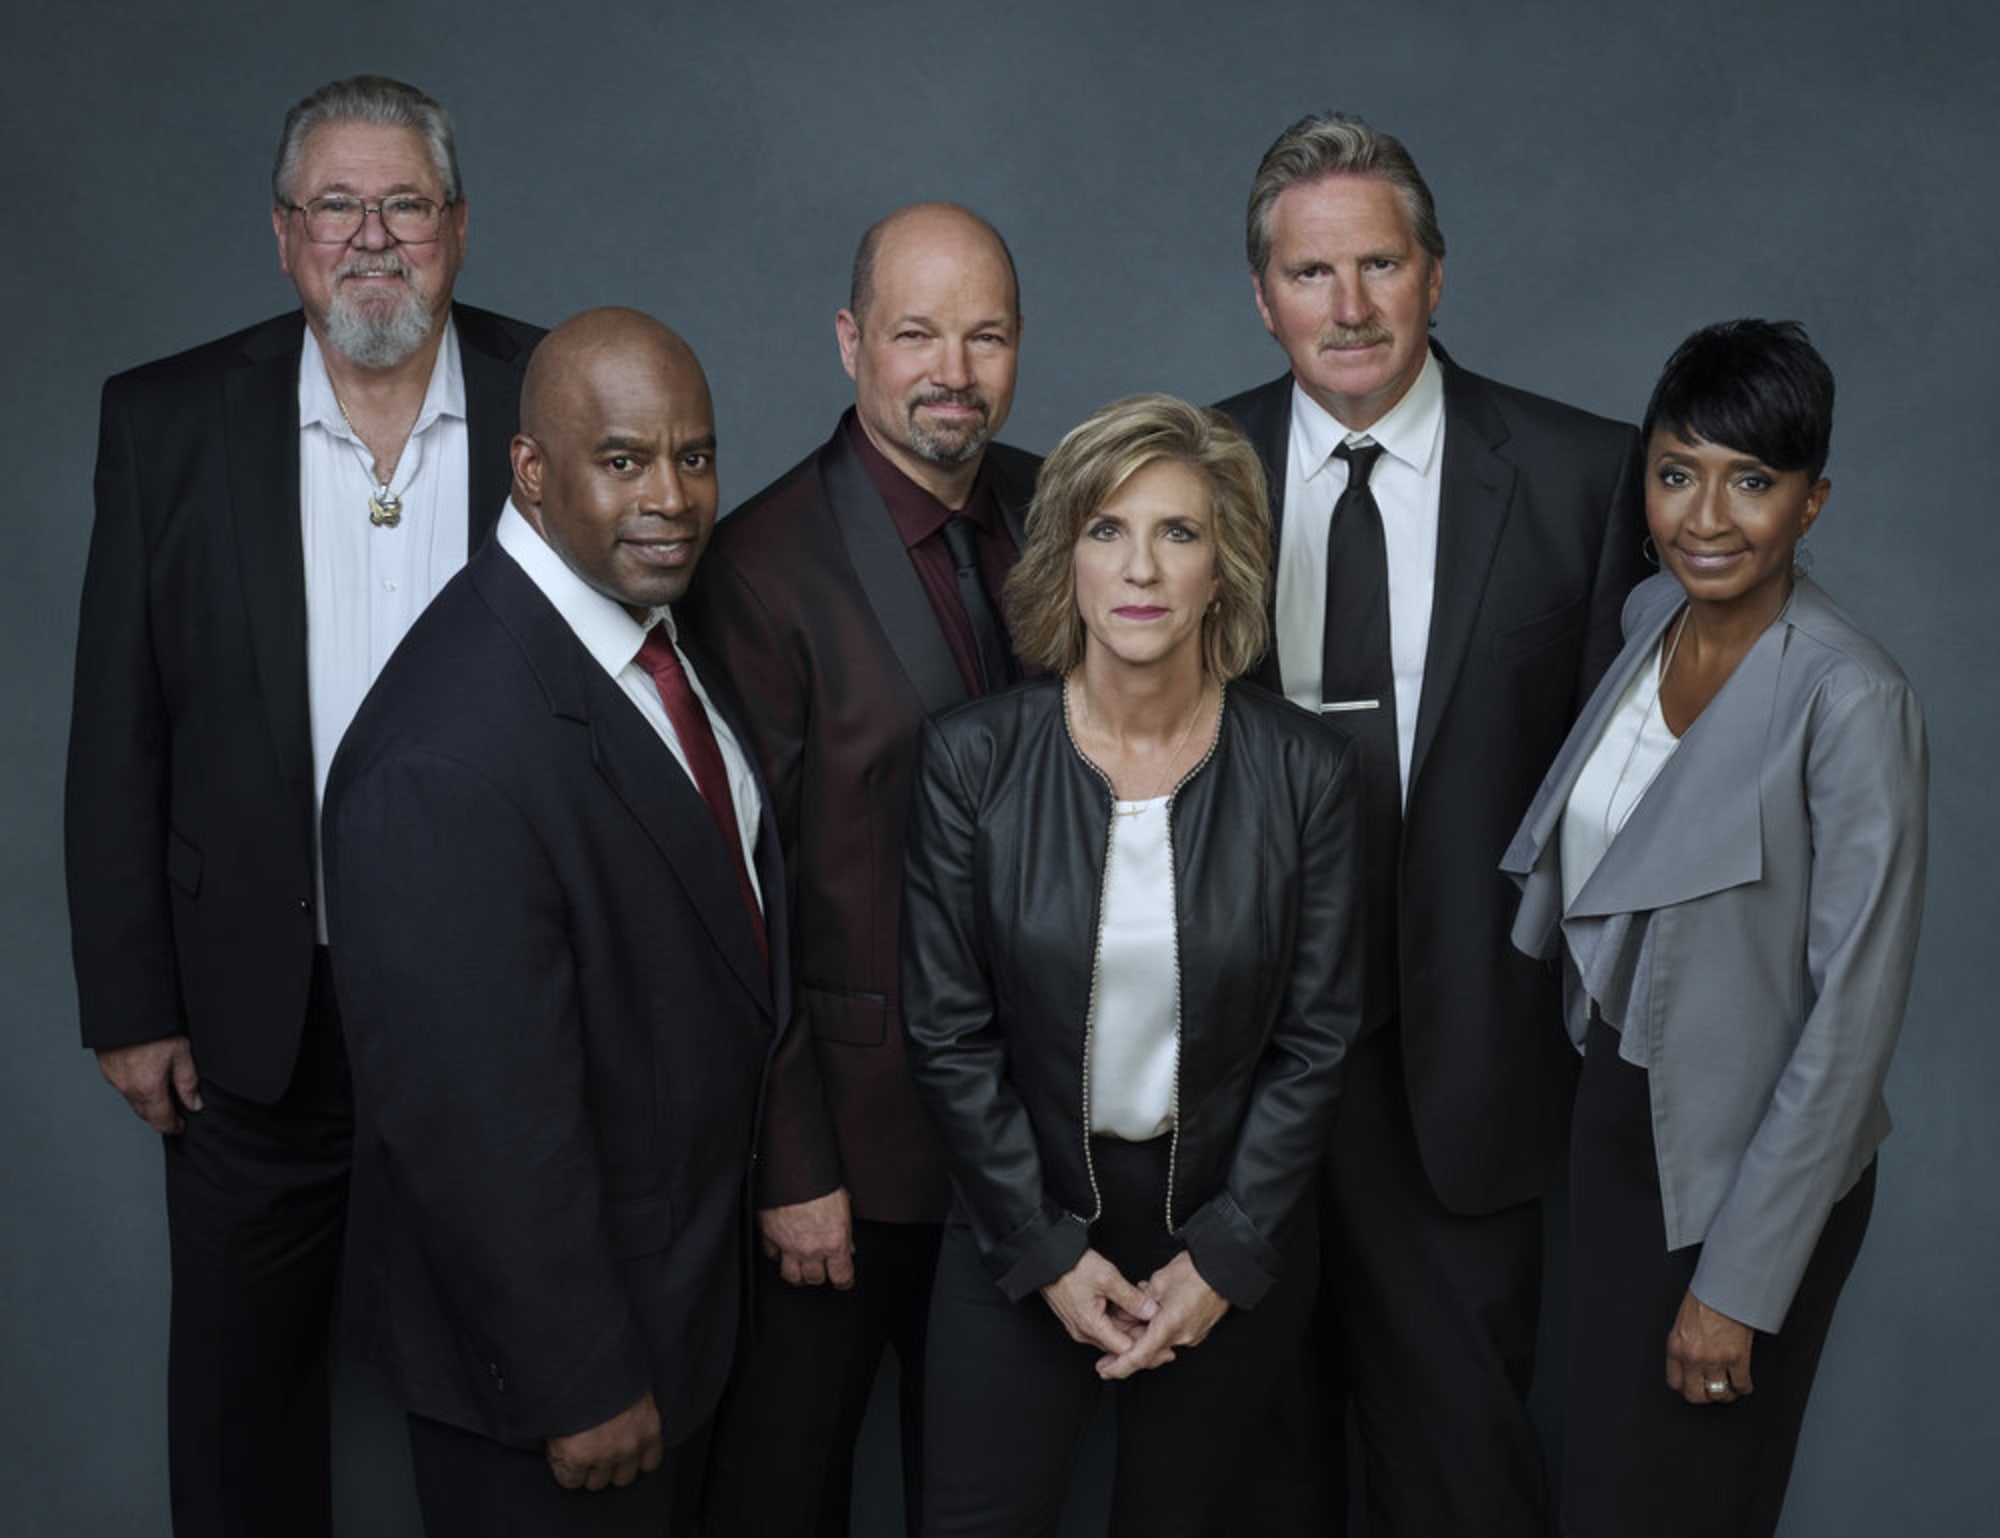 Cold Justice season 6 release date, cast, synopsis, trailer and more